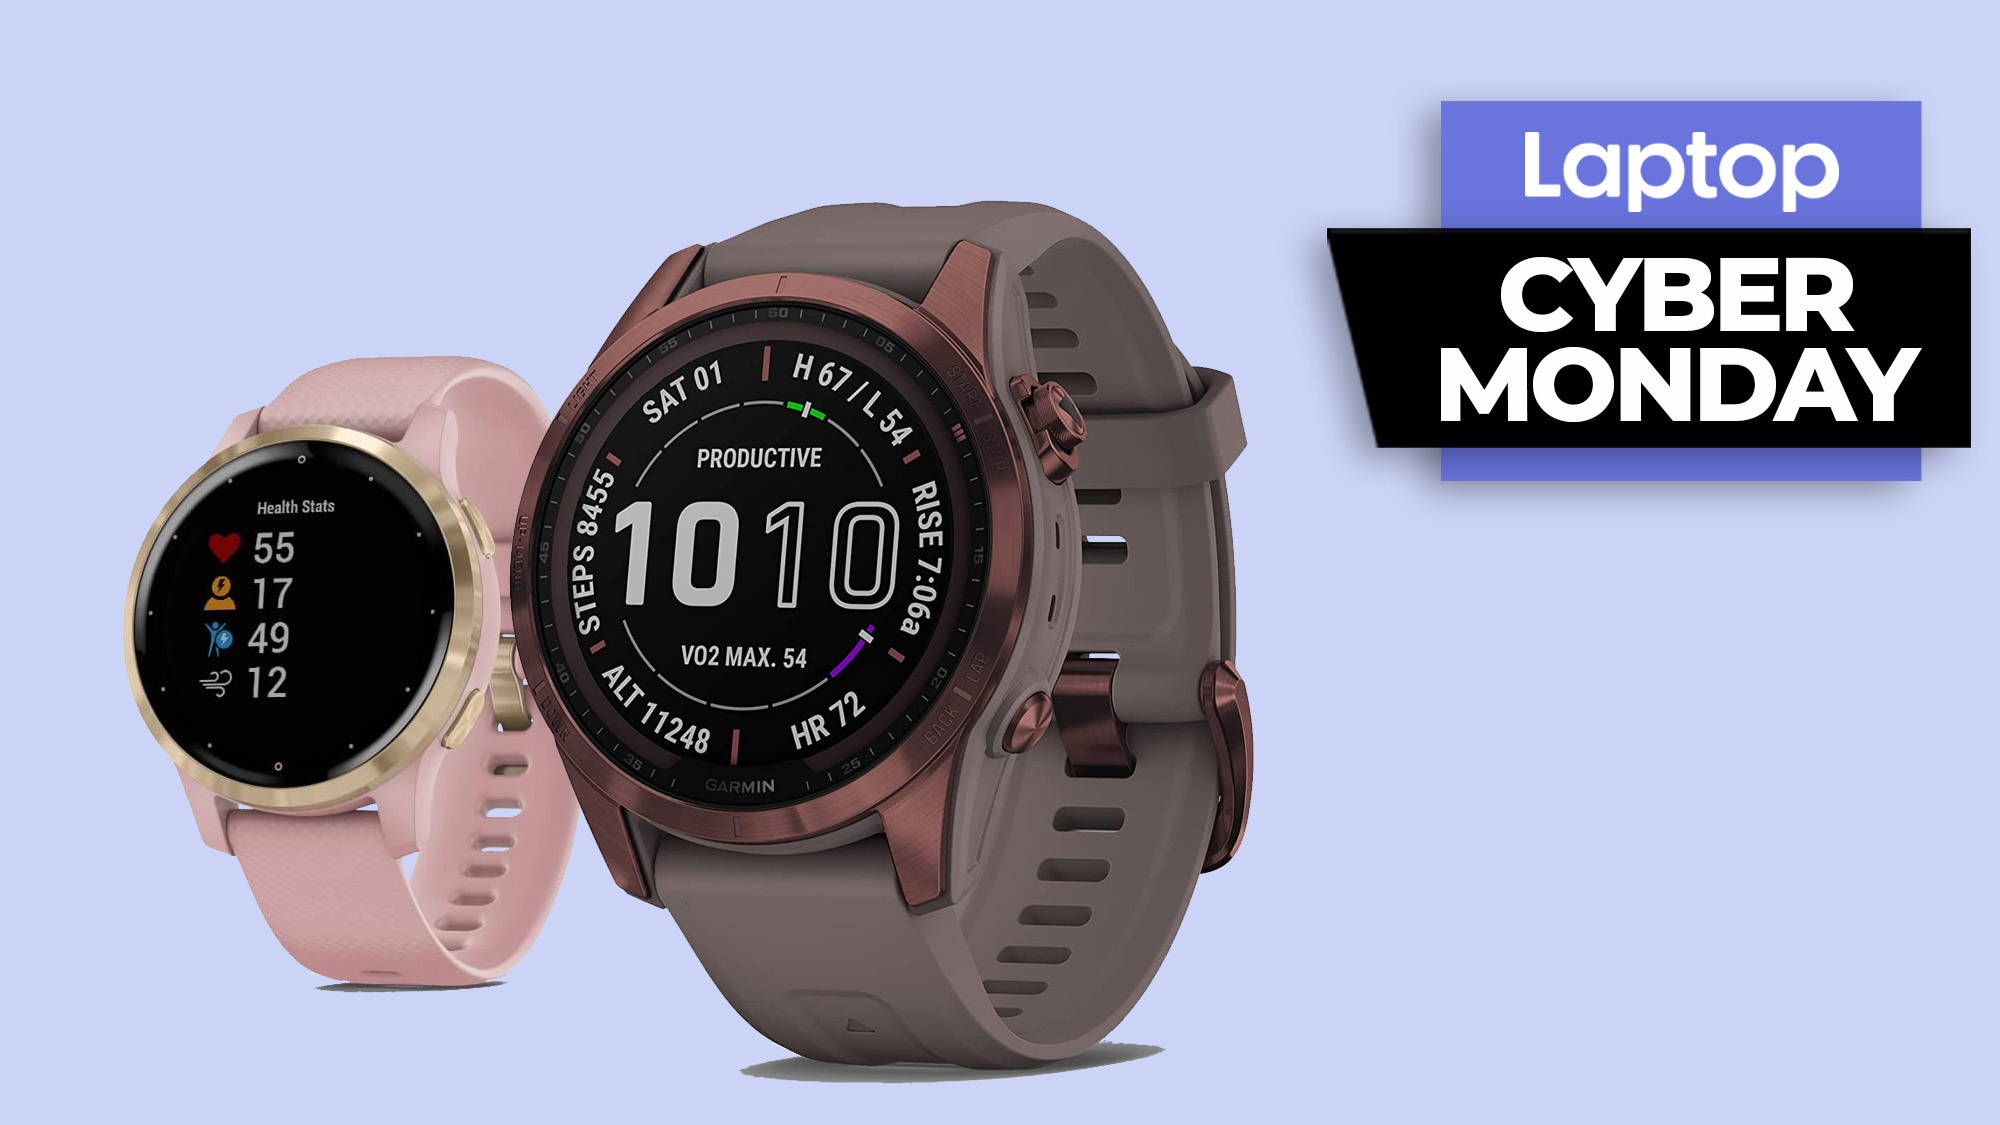 Cyber Monday deals active up to off these Garmin smartwatches | Mag